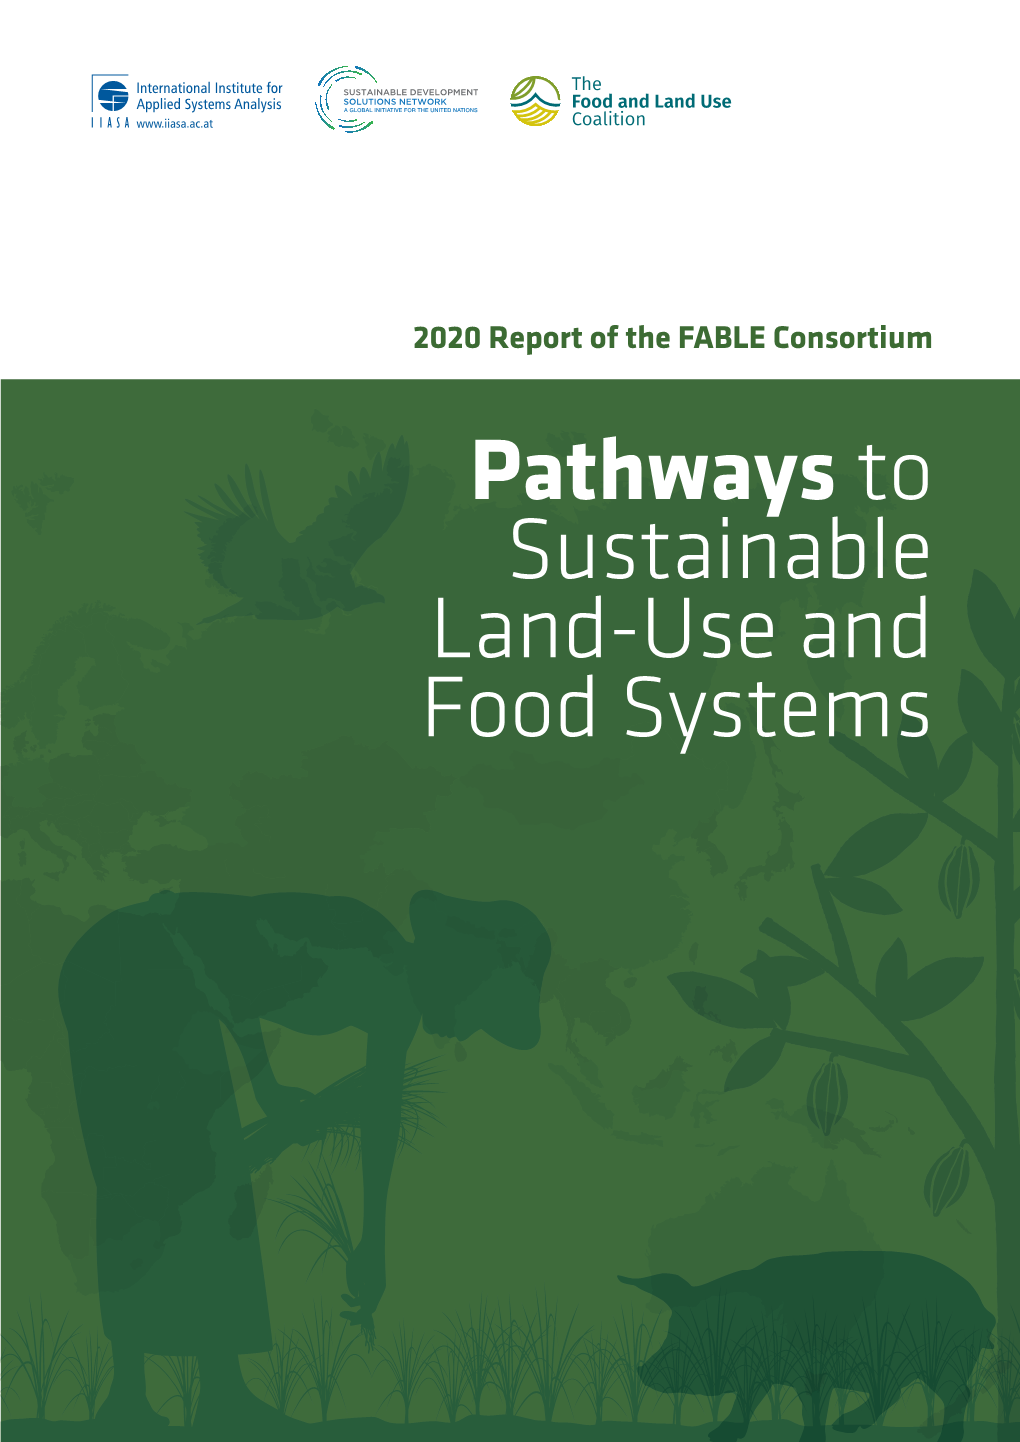 Australia by 2050” In: FABLE 2020, Pathways to Sustainable Land-Use and Food Systems, 2020 Report of the FABLE Consortium